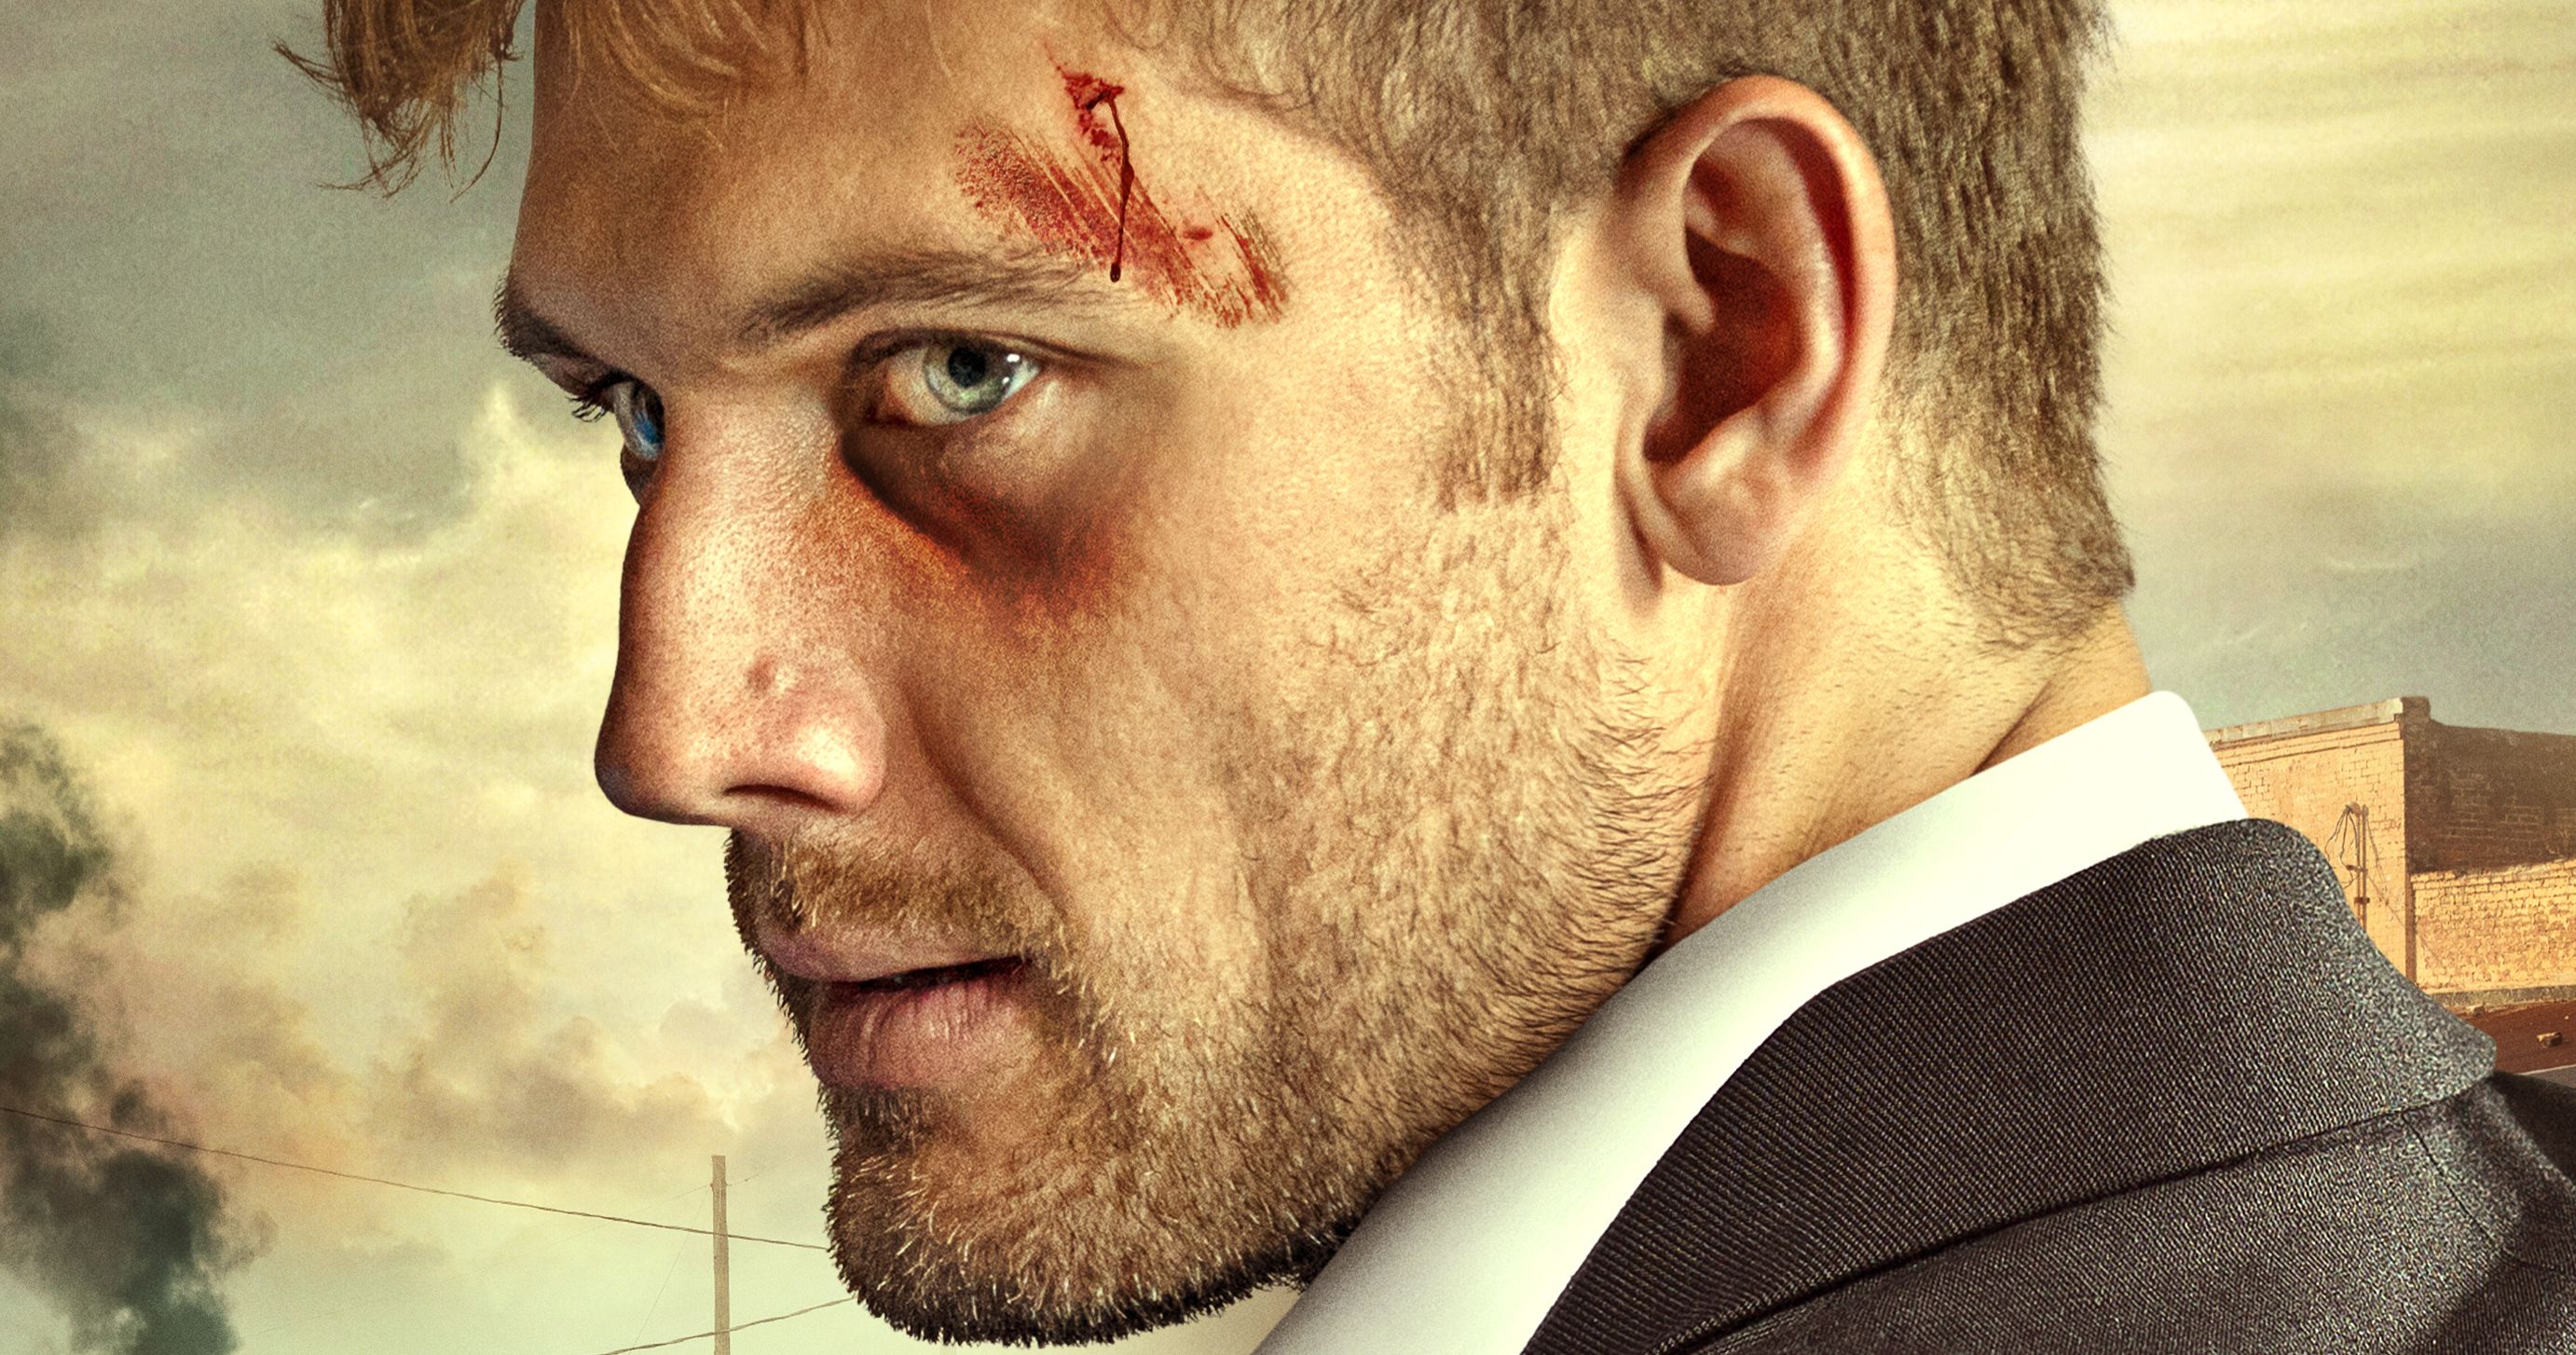 Collection Trailer Throws Alex Pettyfer Into the High Stakes World of Debt Collectors